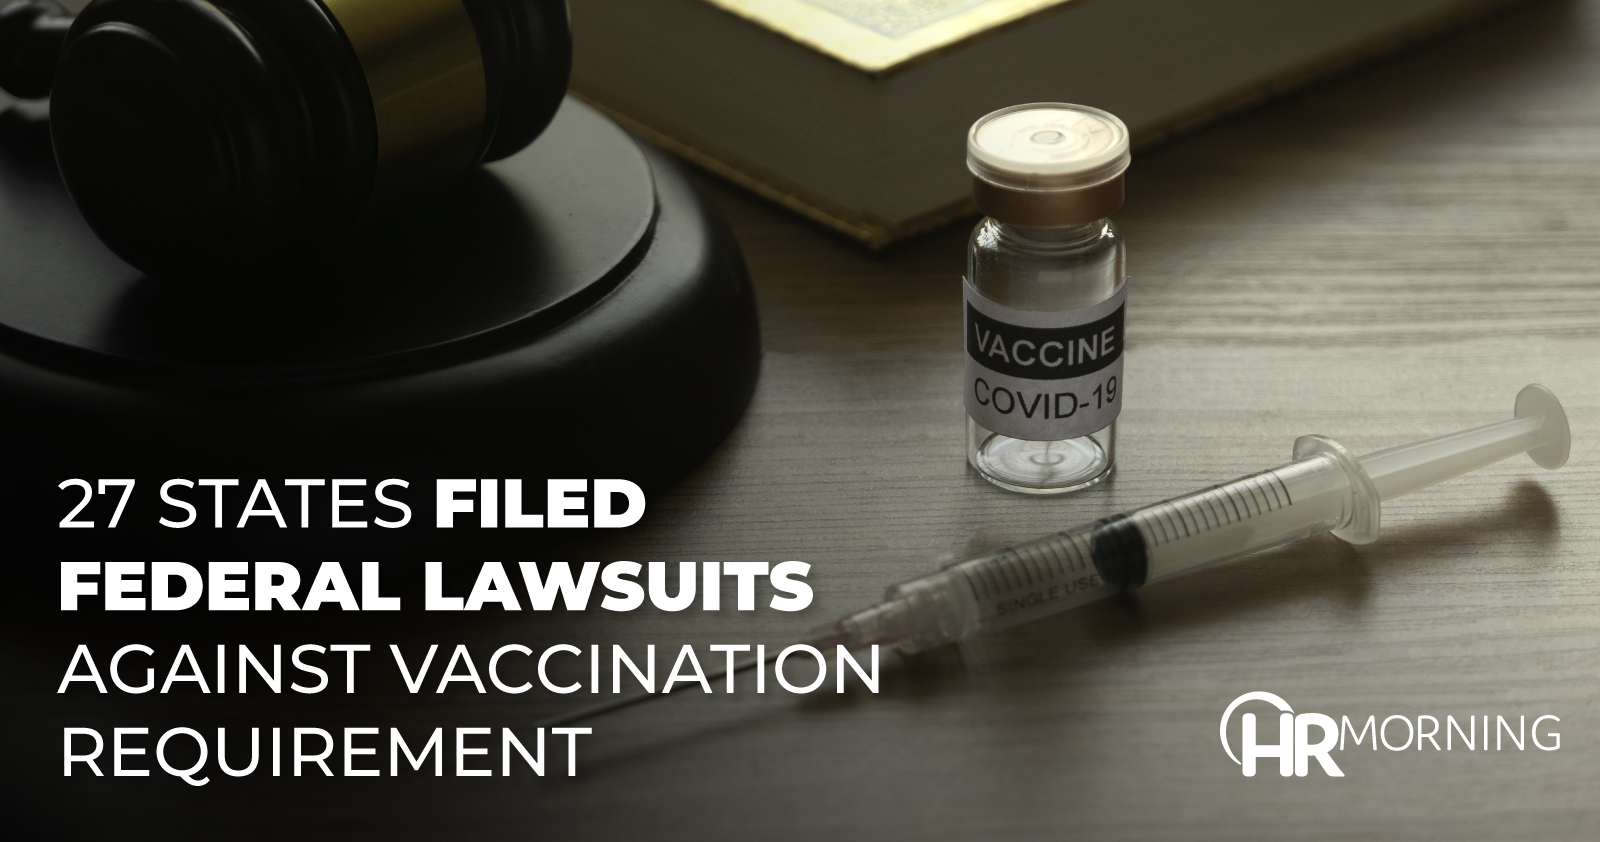 27 States Filed Federal Lawsuits Against Vaccination Requirement